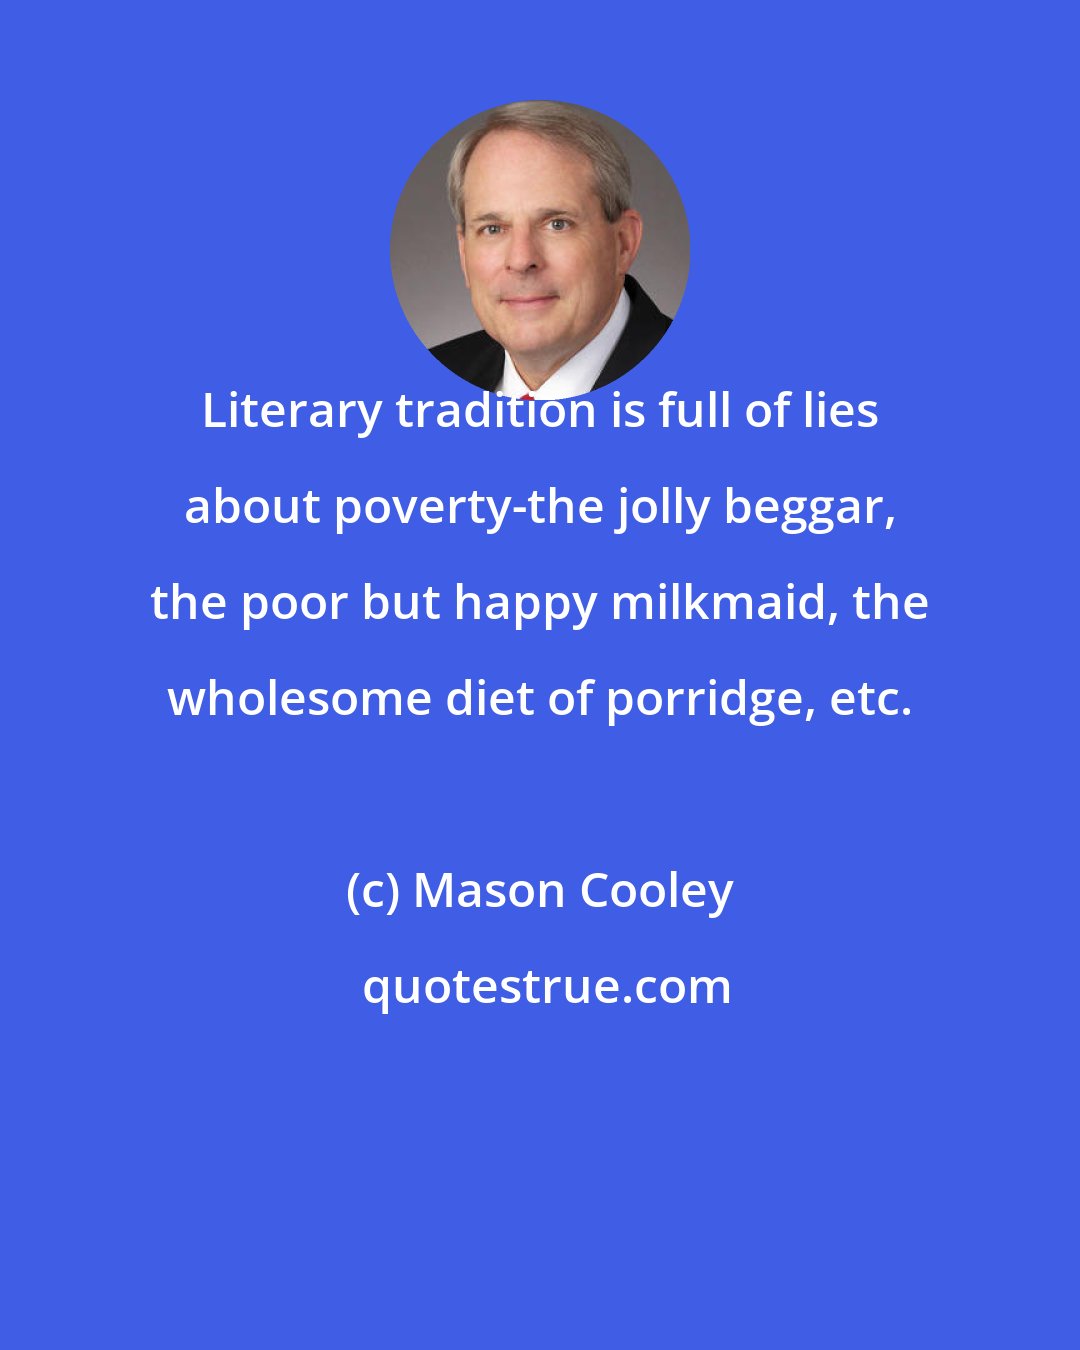 Mason Cooley: Literary tradition is full of lies about poverty-the jolly beggar, the poor but happy milkmaid, the wholesome diet of porridge, etc.